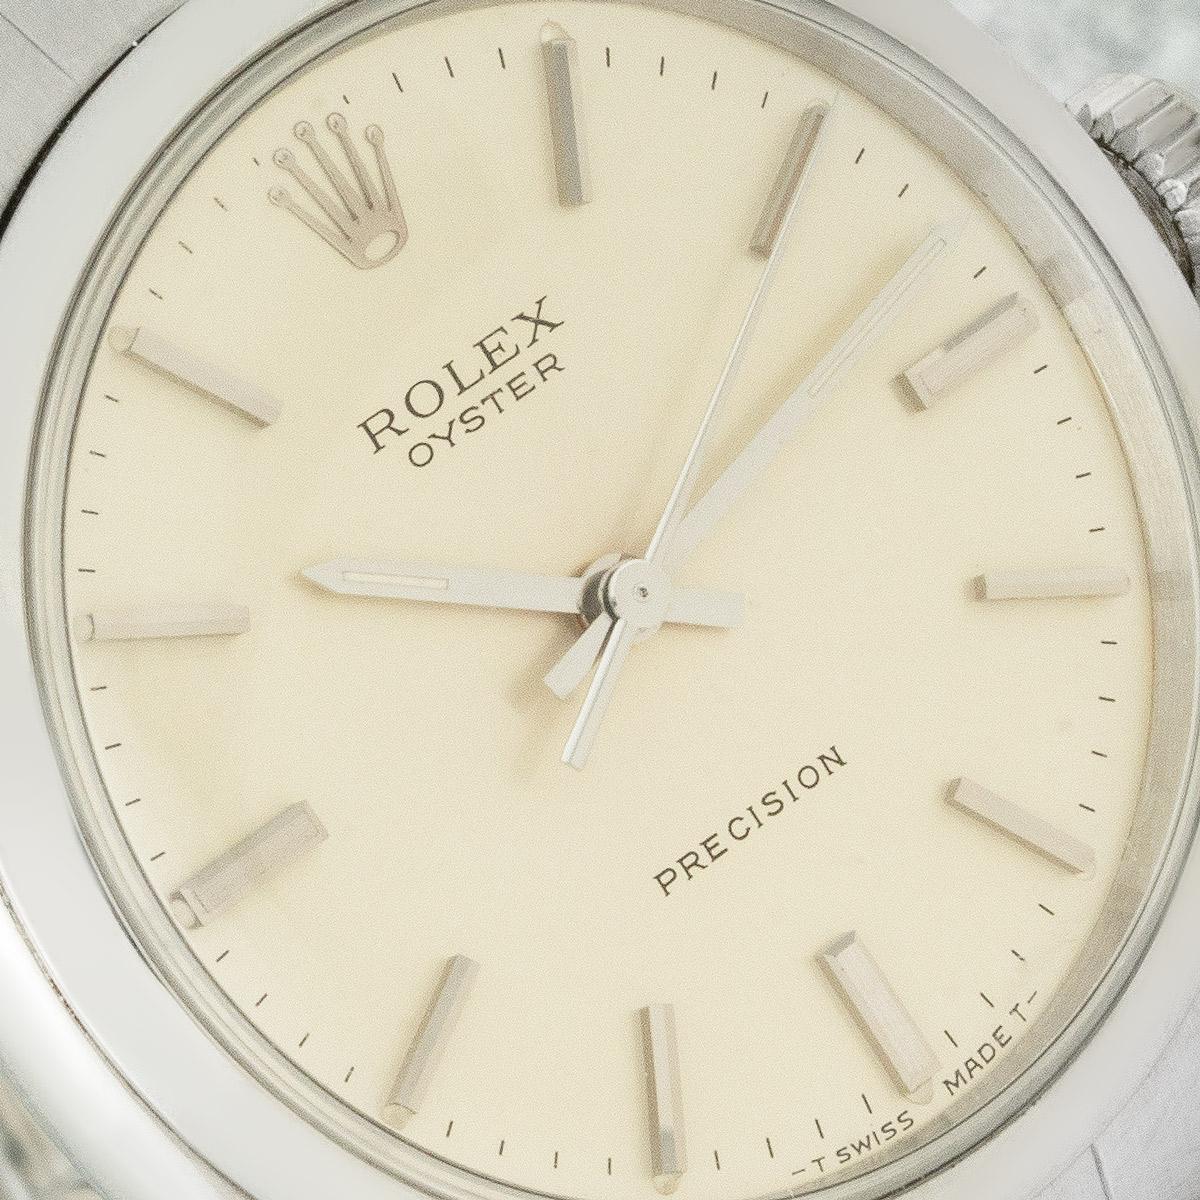 A 34mm Precision watch by Rolex crafted in stainless steel. Featuring a silver dial with applied hour markers and a smooth steel bezel. The watch is fitted with a plexiglass, a manual winding movement and a steel riveted bracelet equipped with a